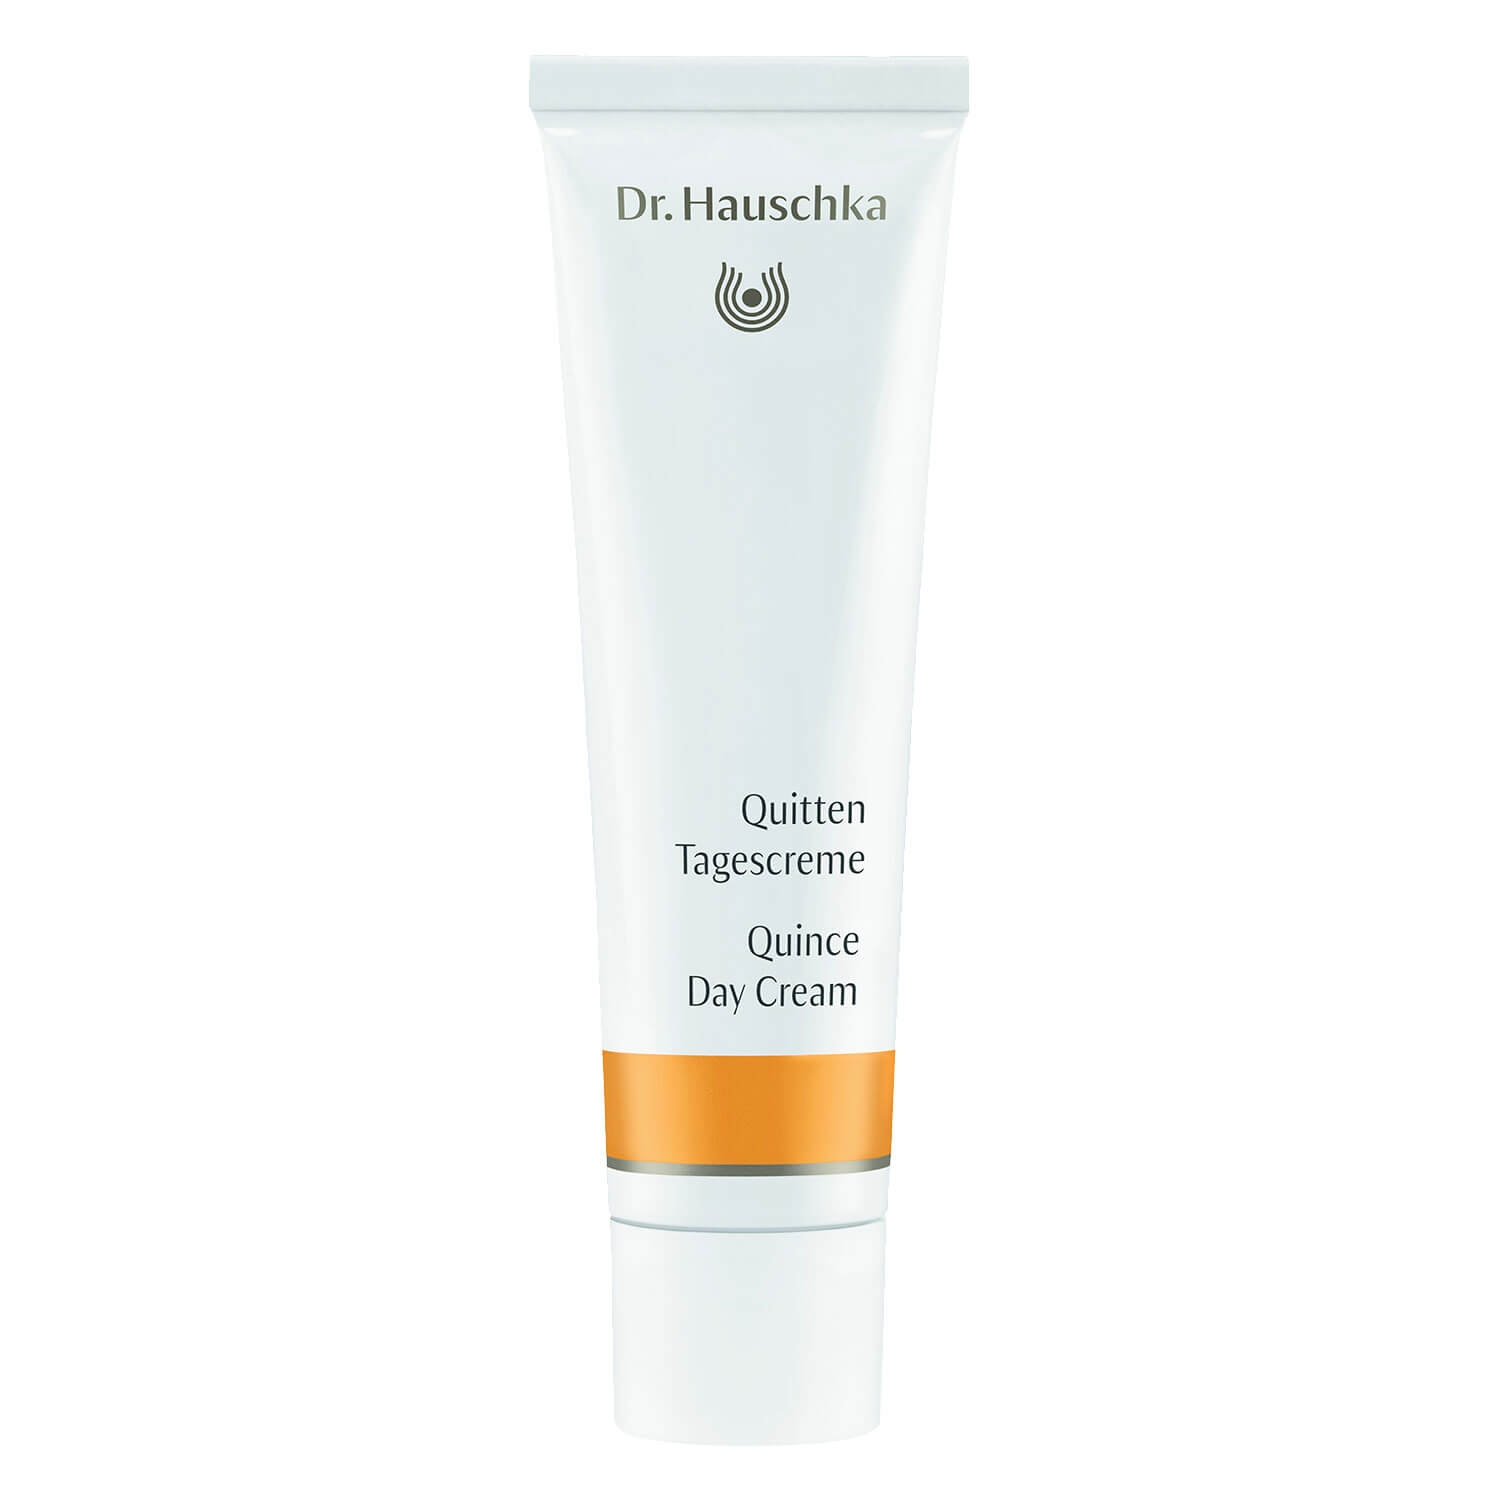 Product image from Dr. Hauschka - Quitten Tagescreme